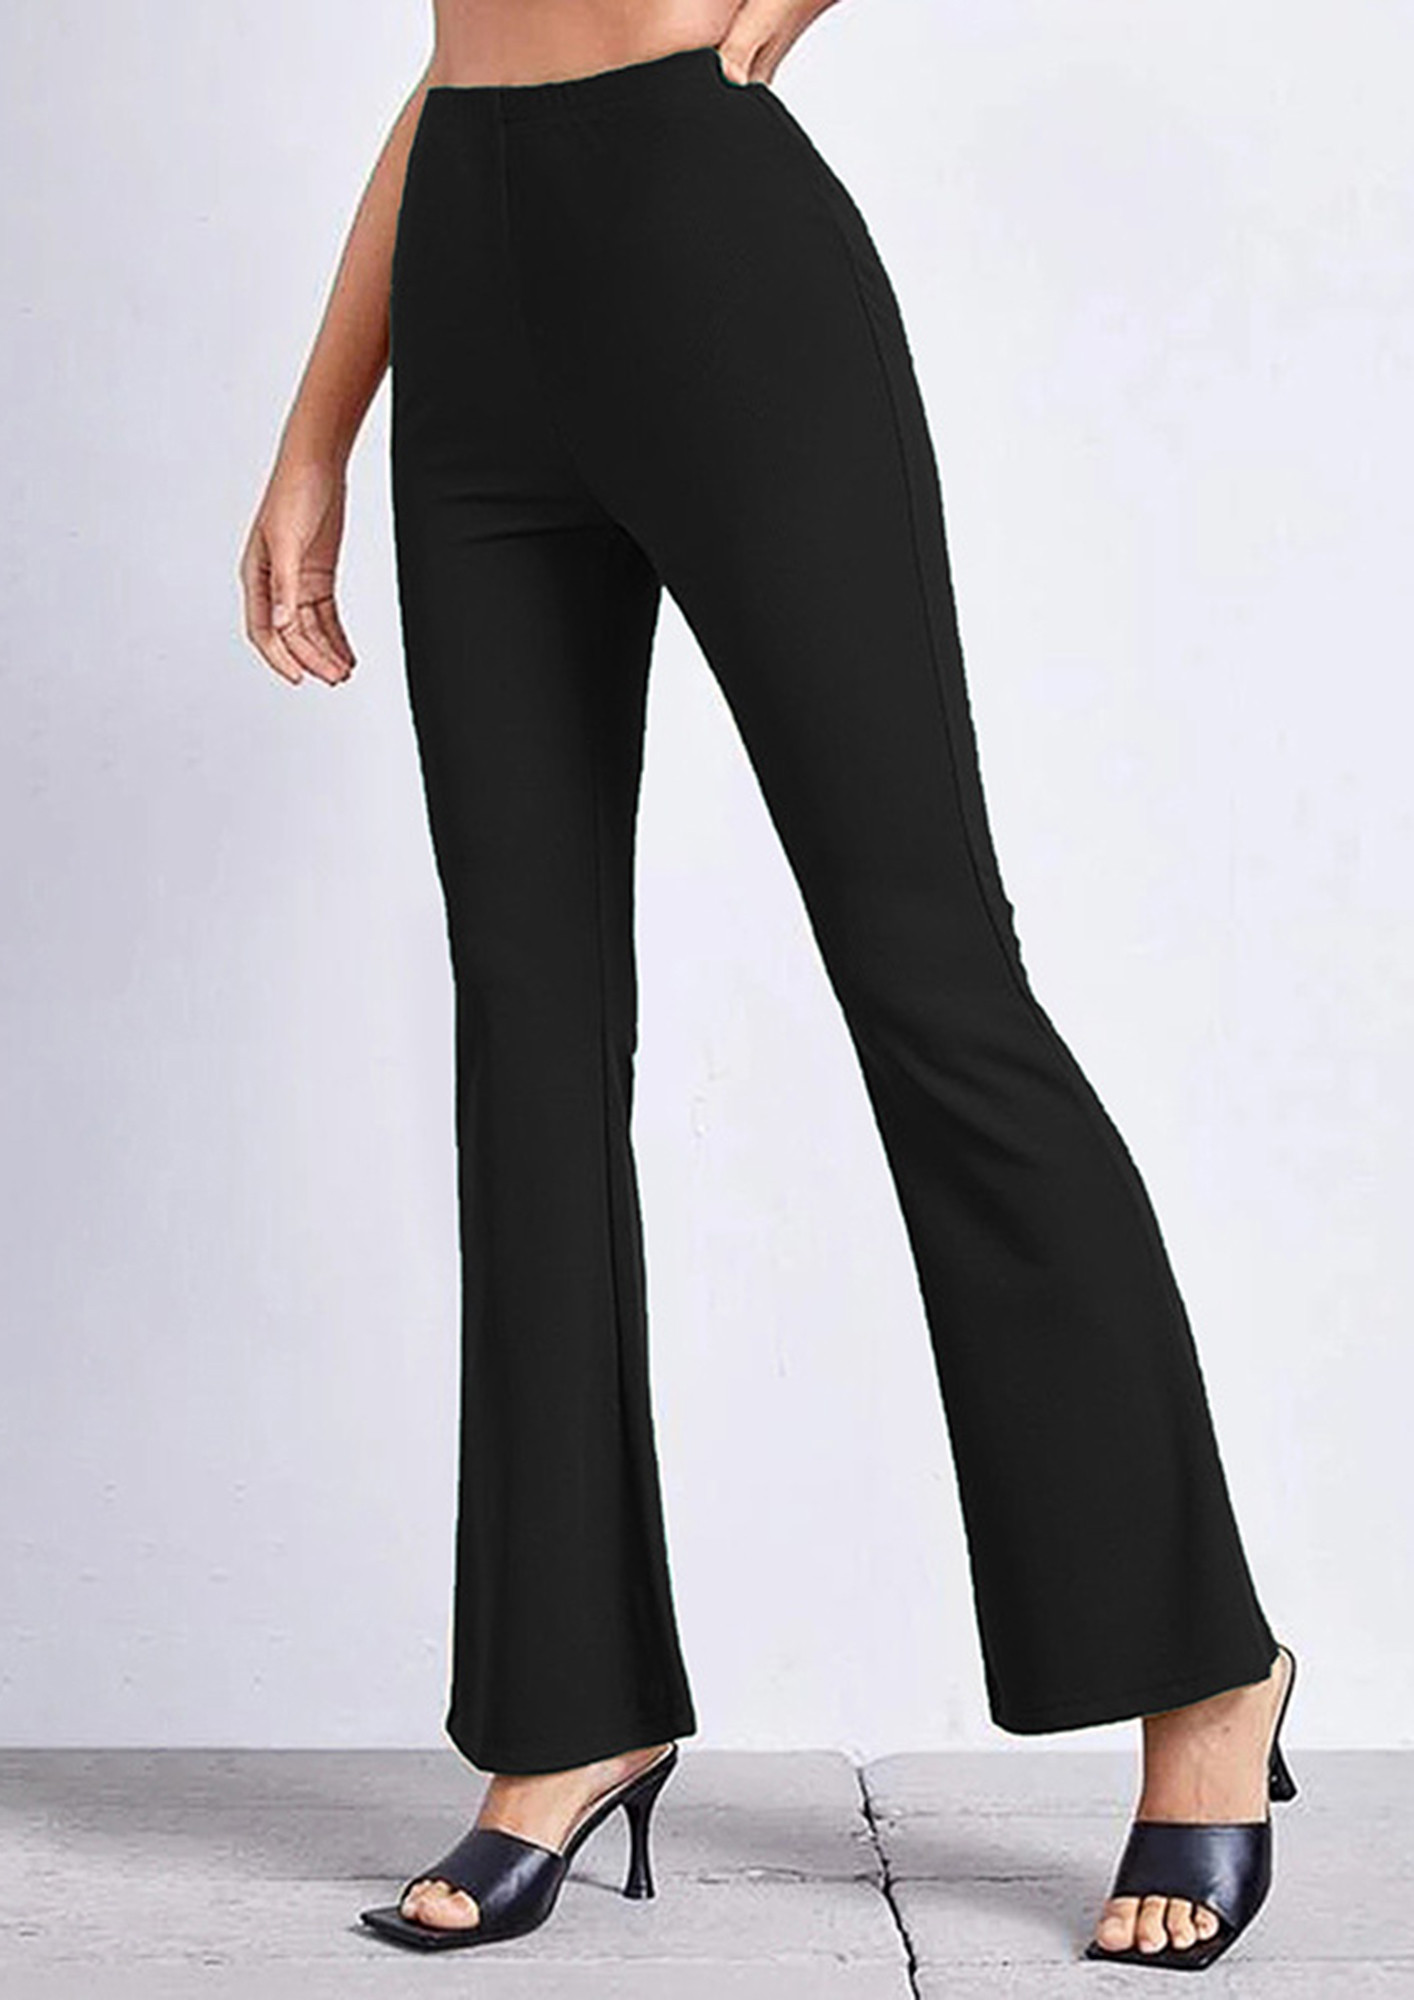 Black Flared trousers with high waist - Buy Online